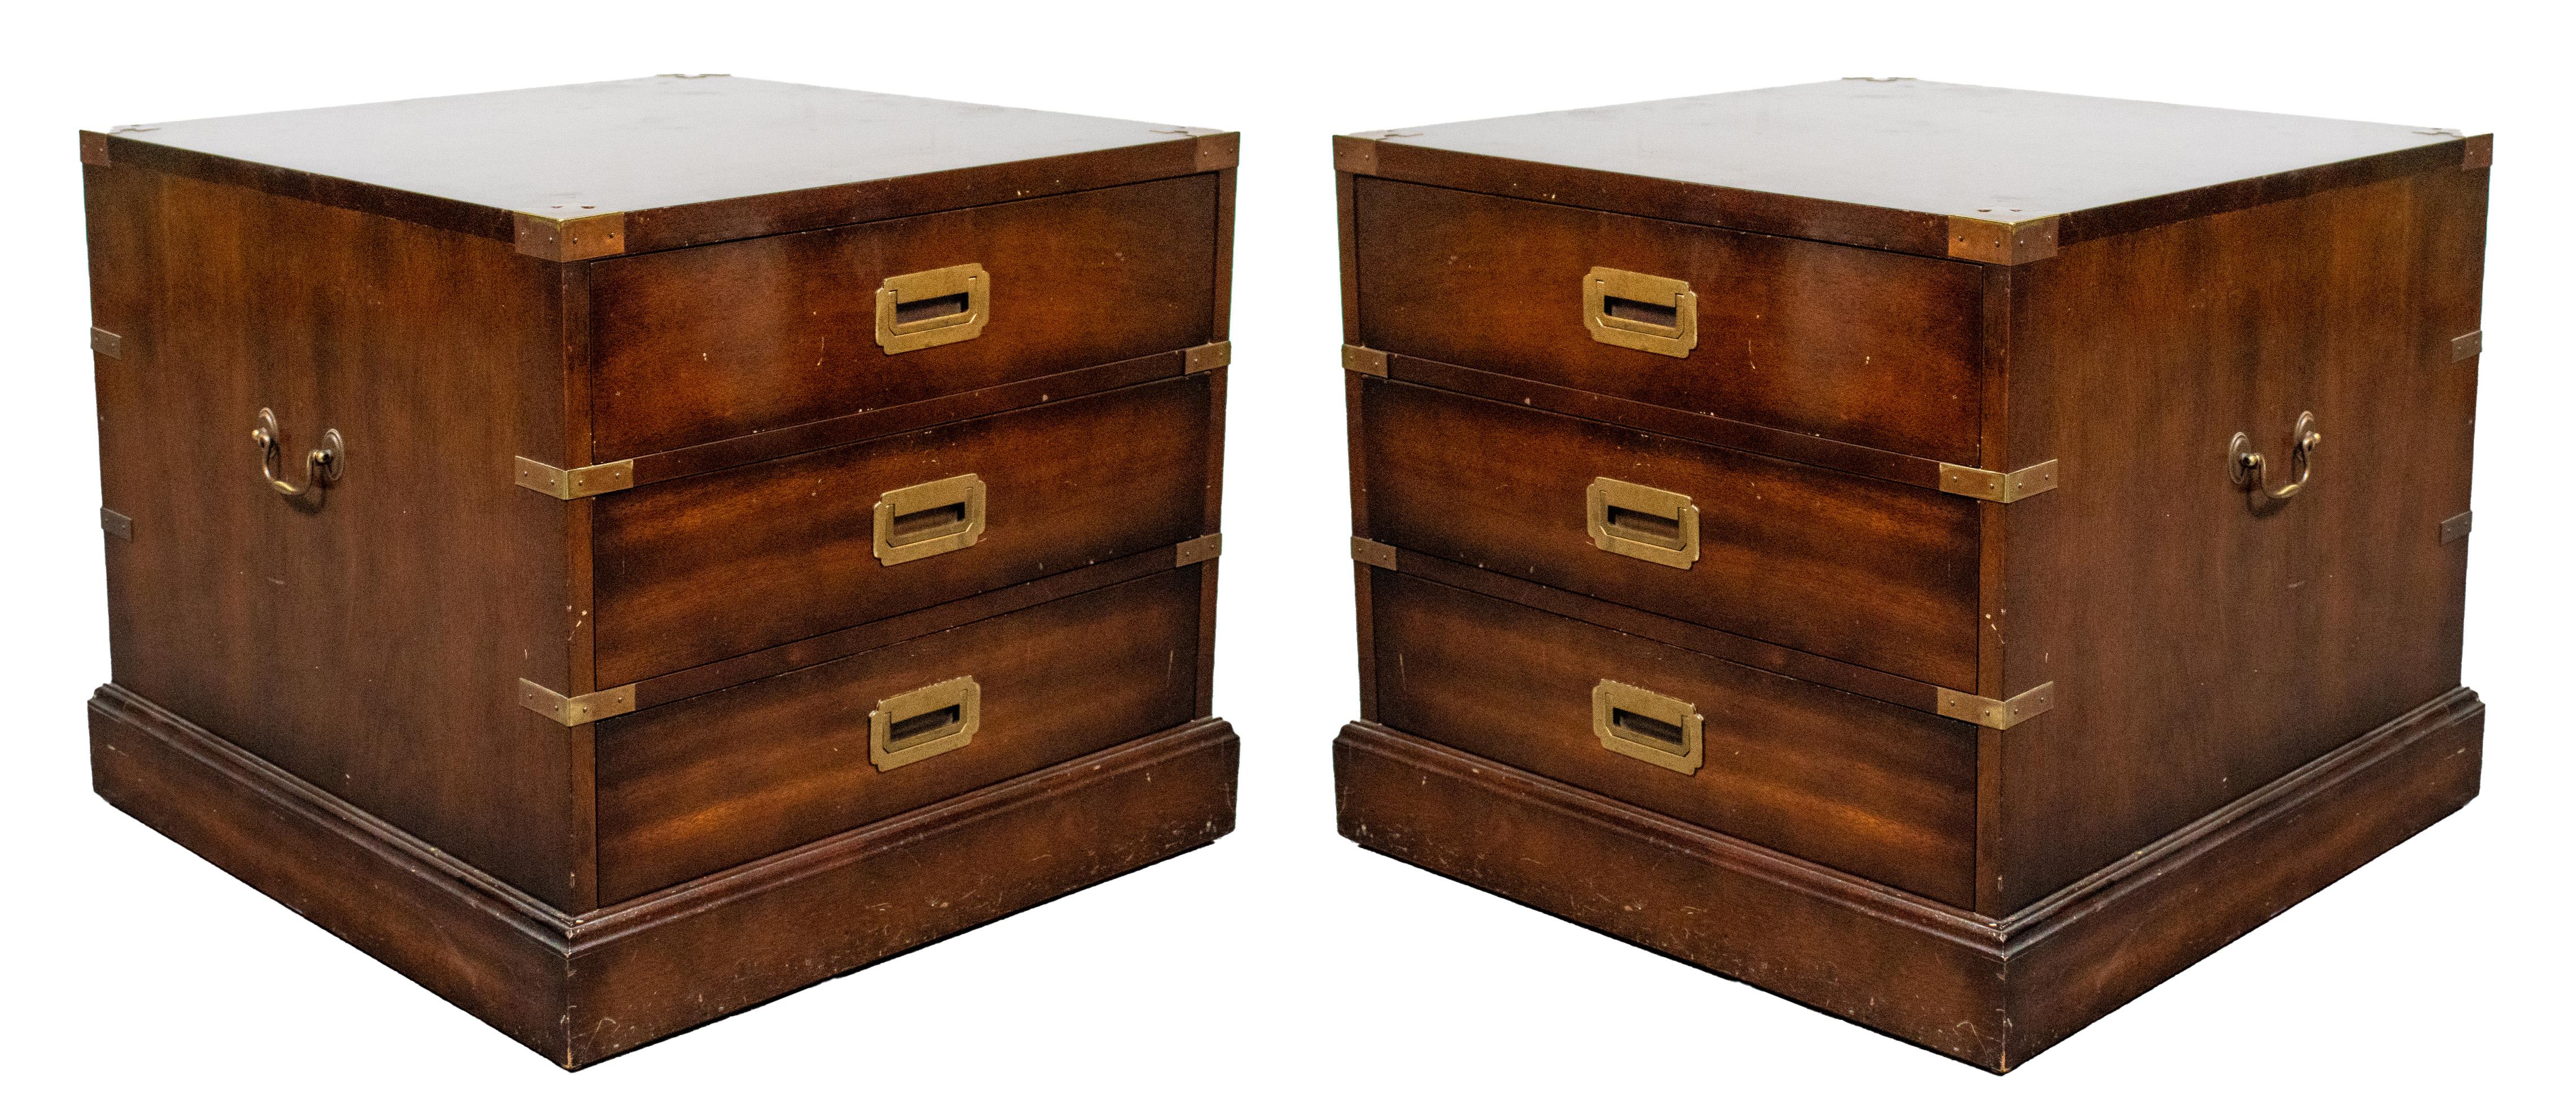 Pair of English mahogany campaign chest of three drawers, brass mounted and with swing pulls, handles at sides. 
Measures: 22